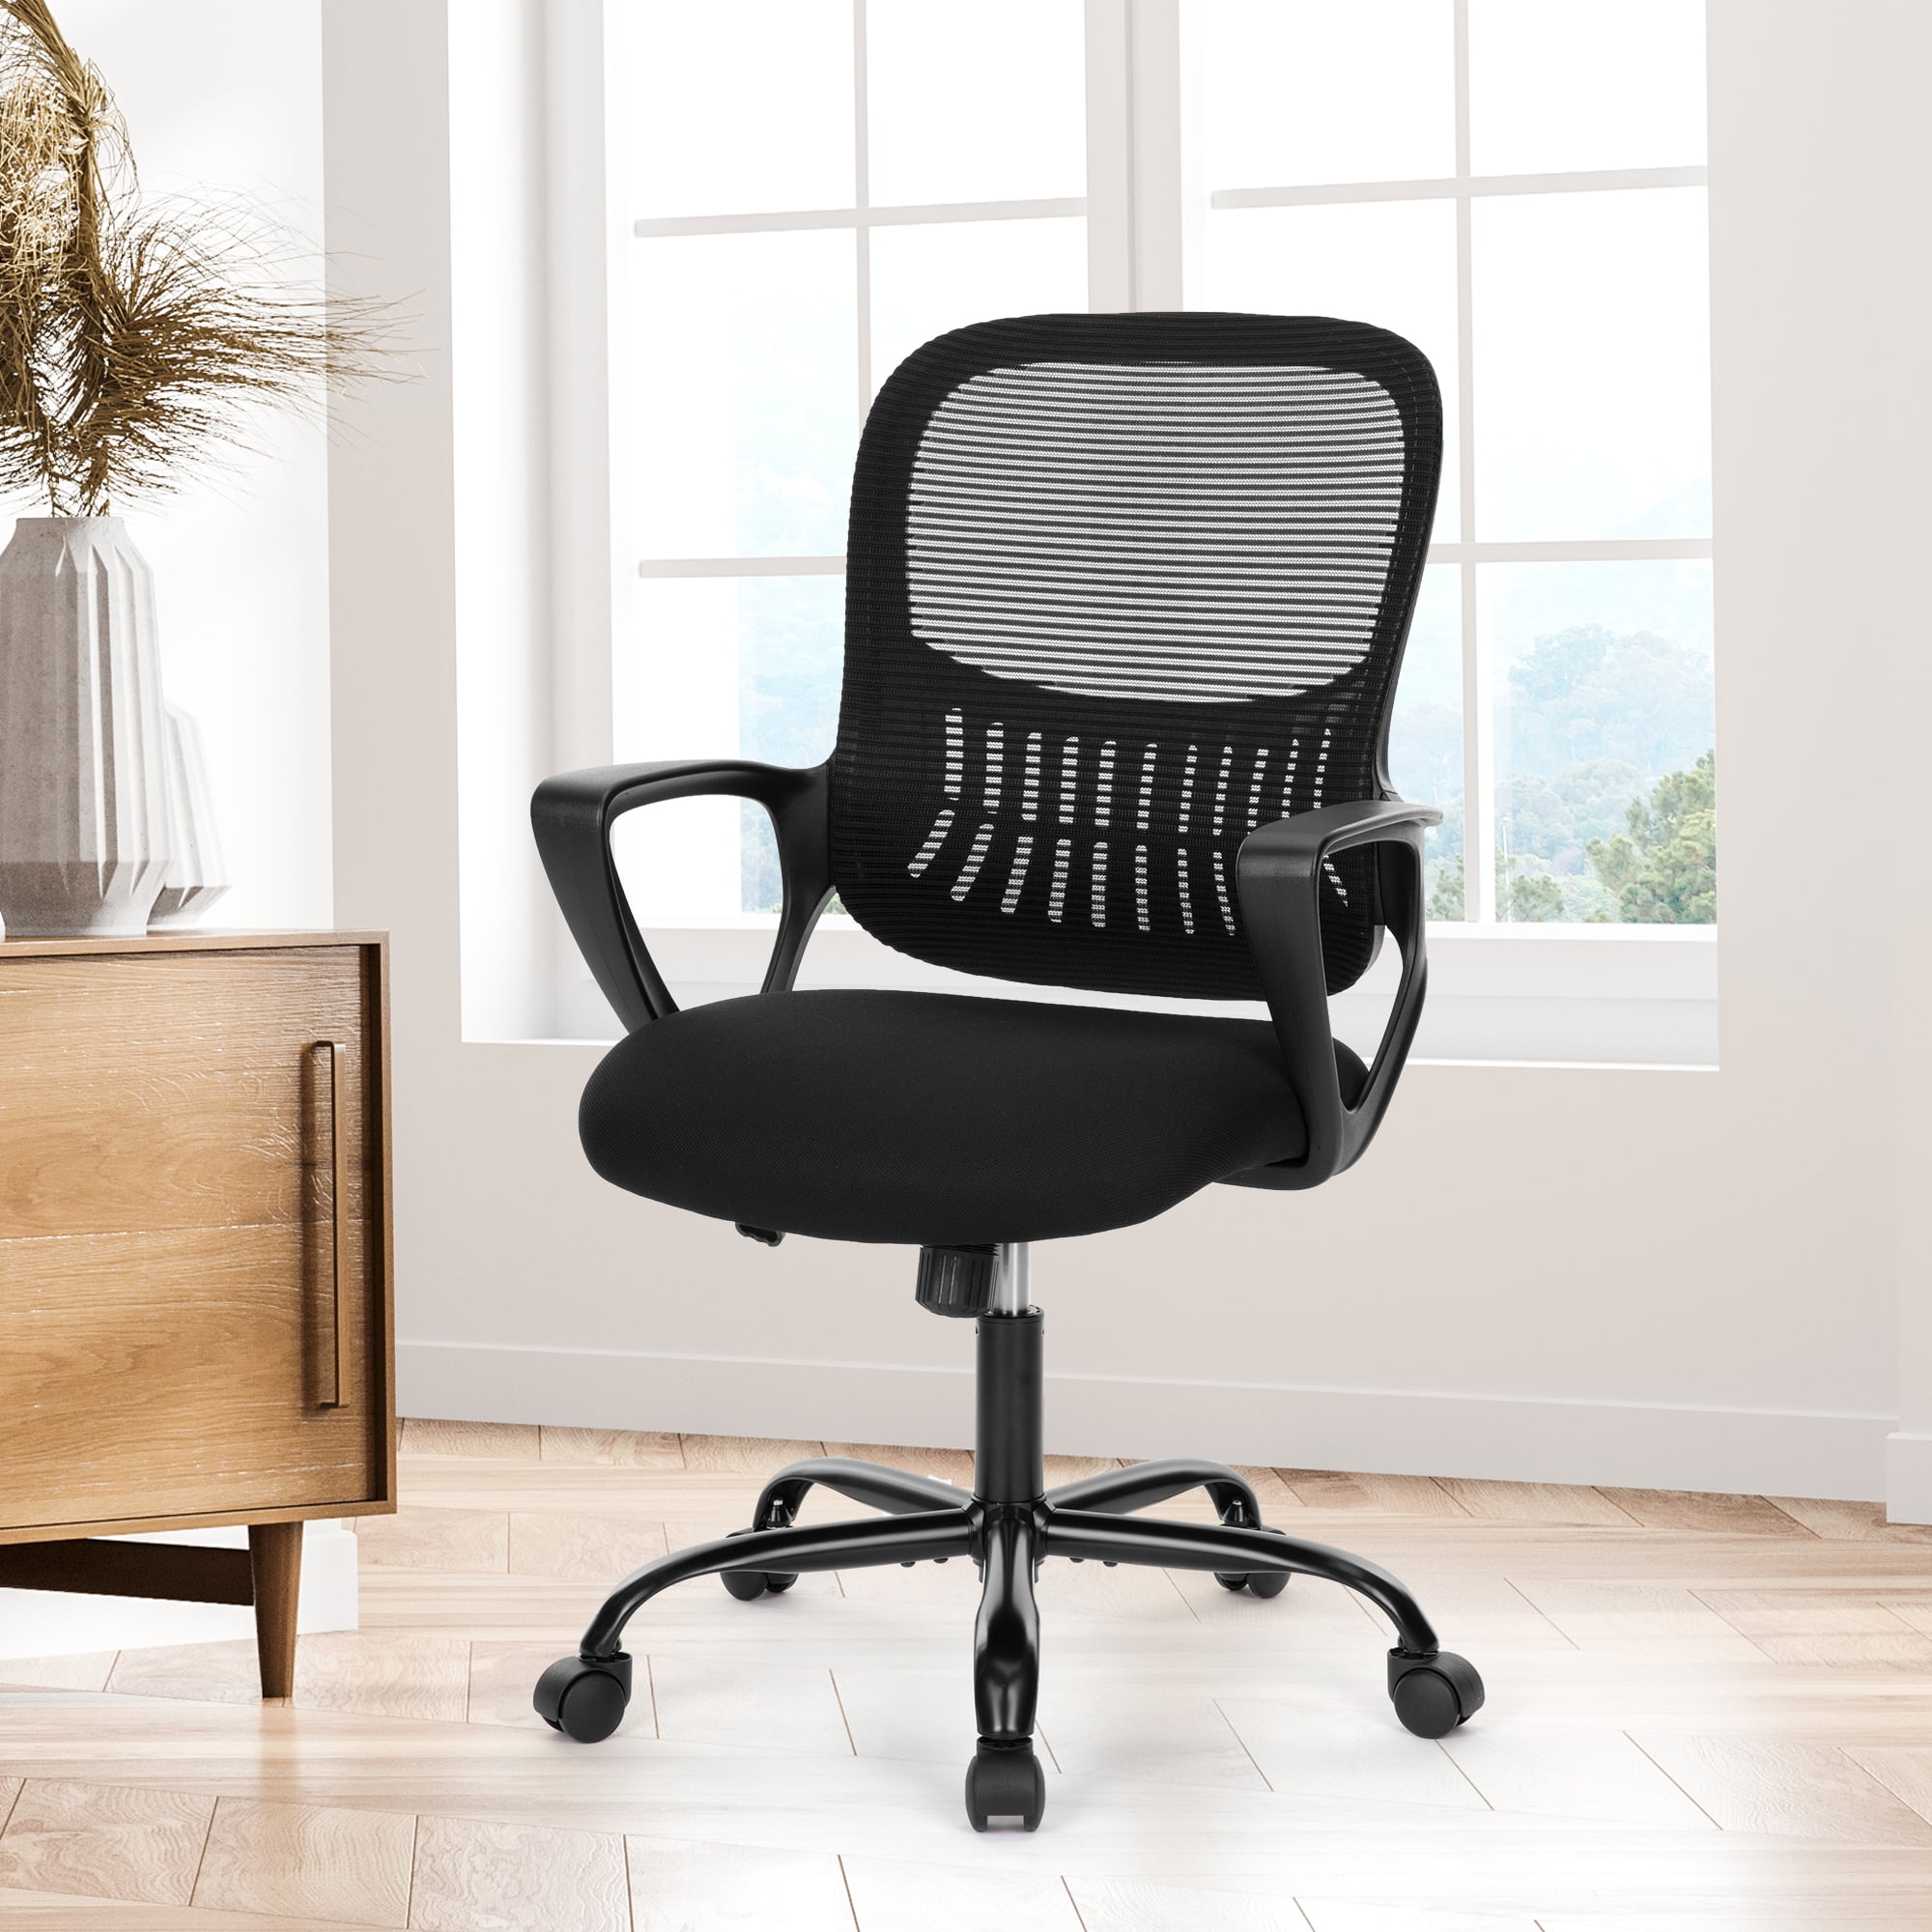 Yangming Ergonomic Office Chair, Mid Back Mesh Desk Chair with Lumbar  Support for Home Office, Gray